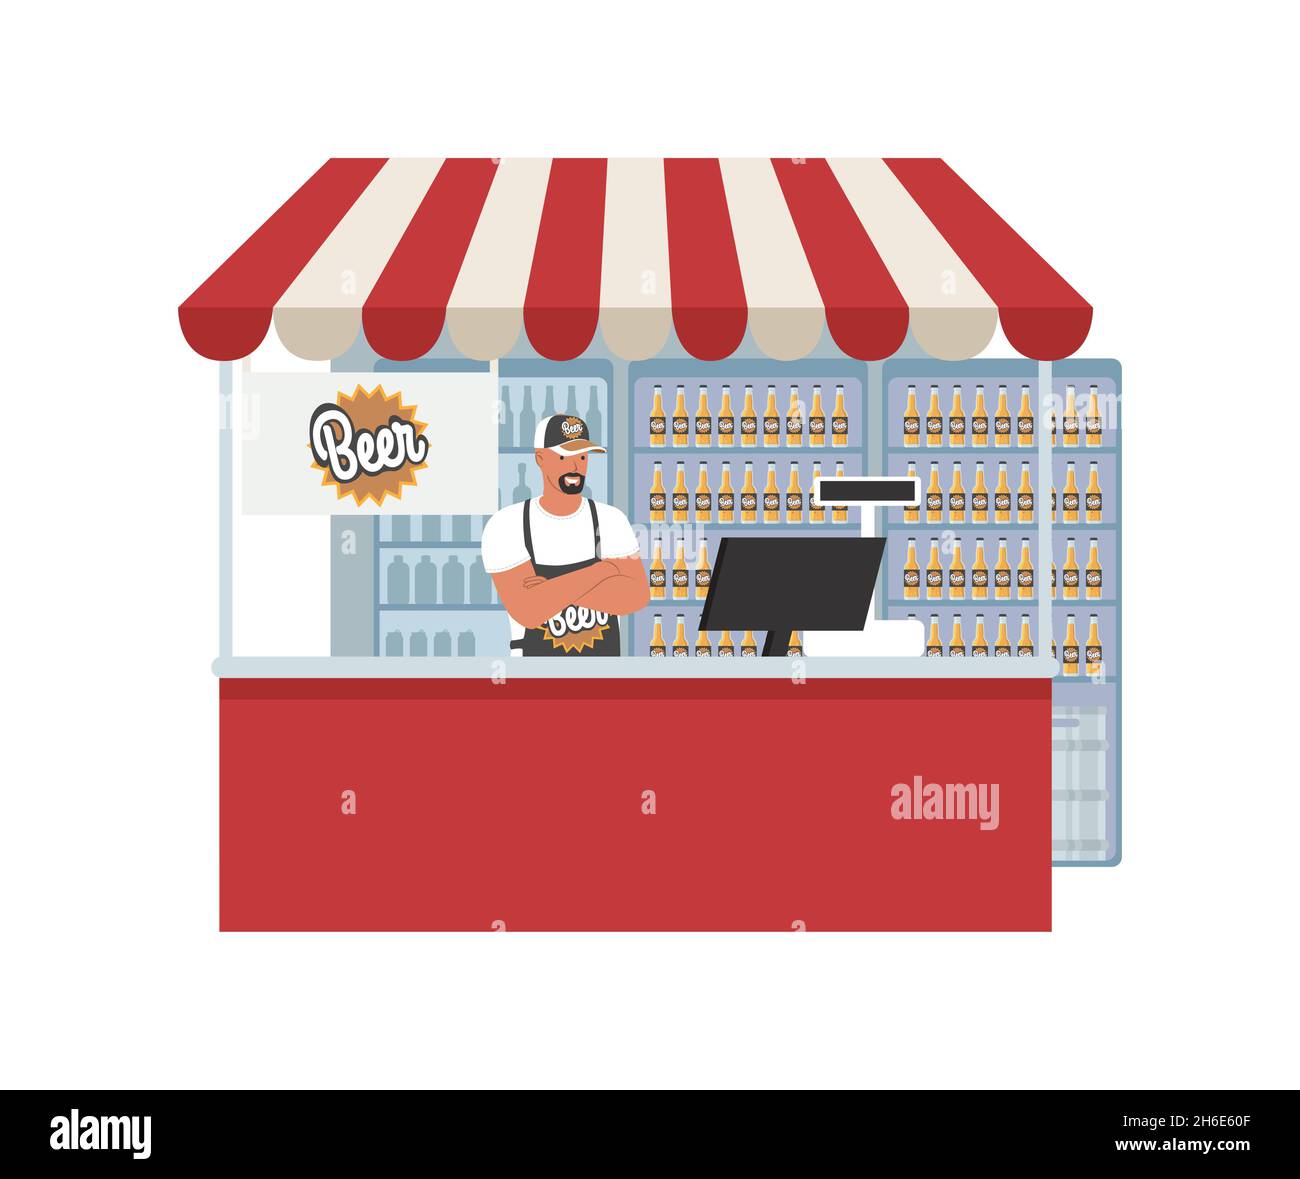 Beer shop, brewery, market, vector illustration. Supermarket, grocery store beer section. Retail shop small business. Stock Vector